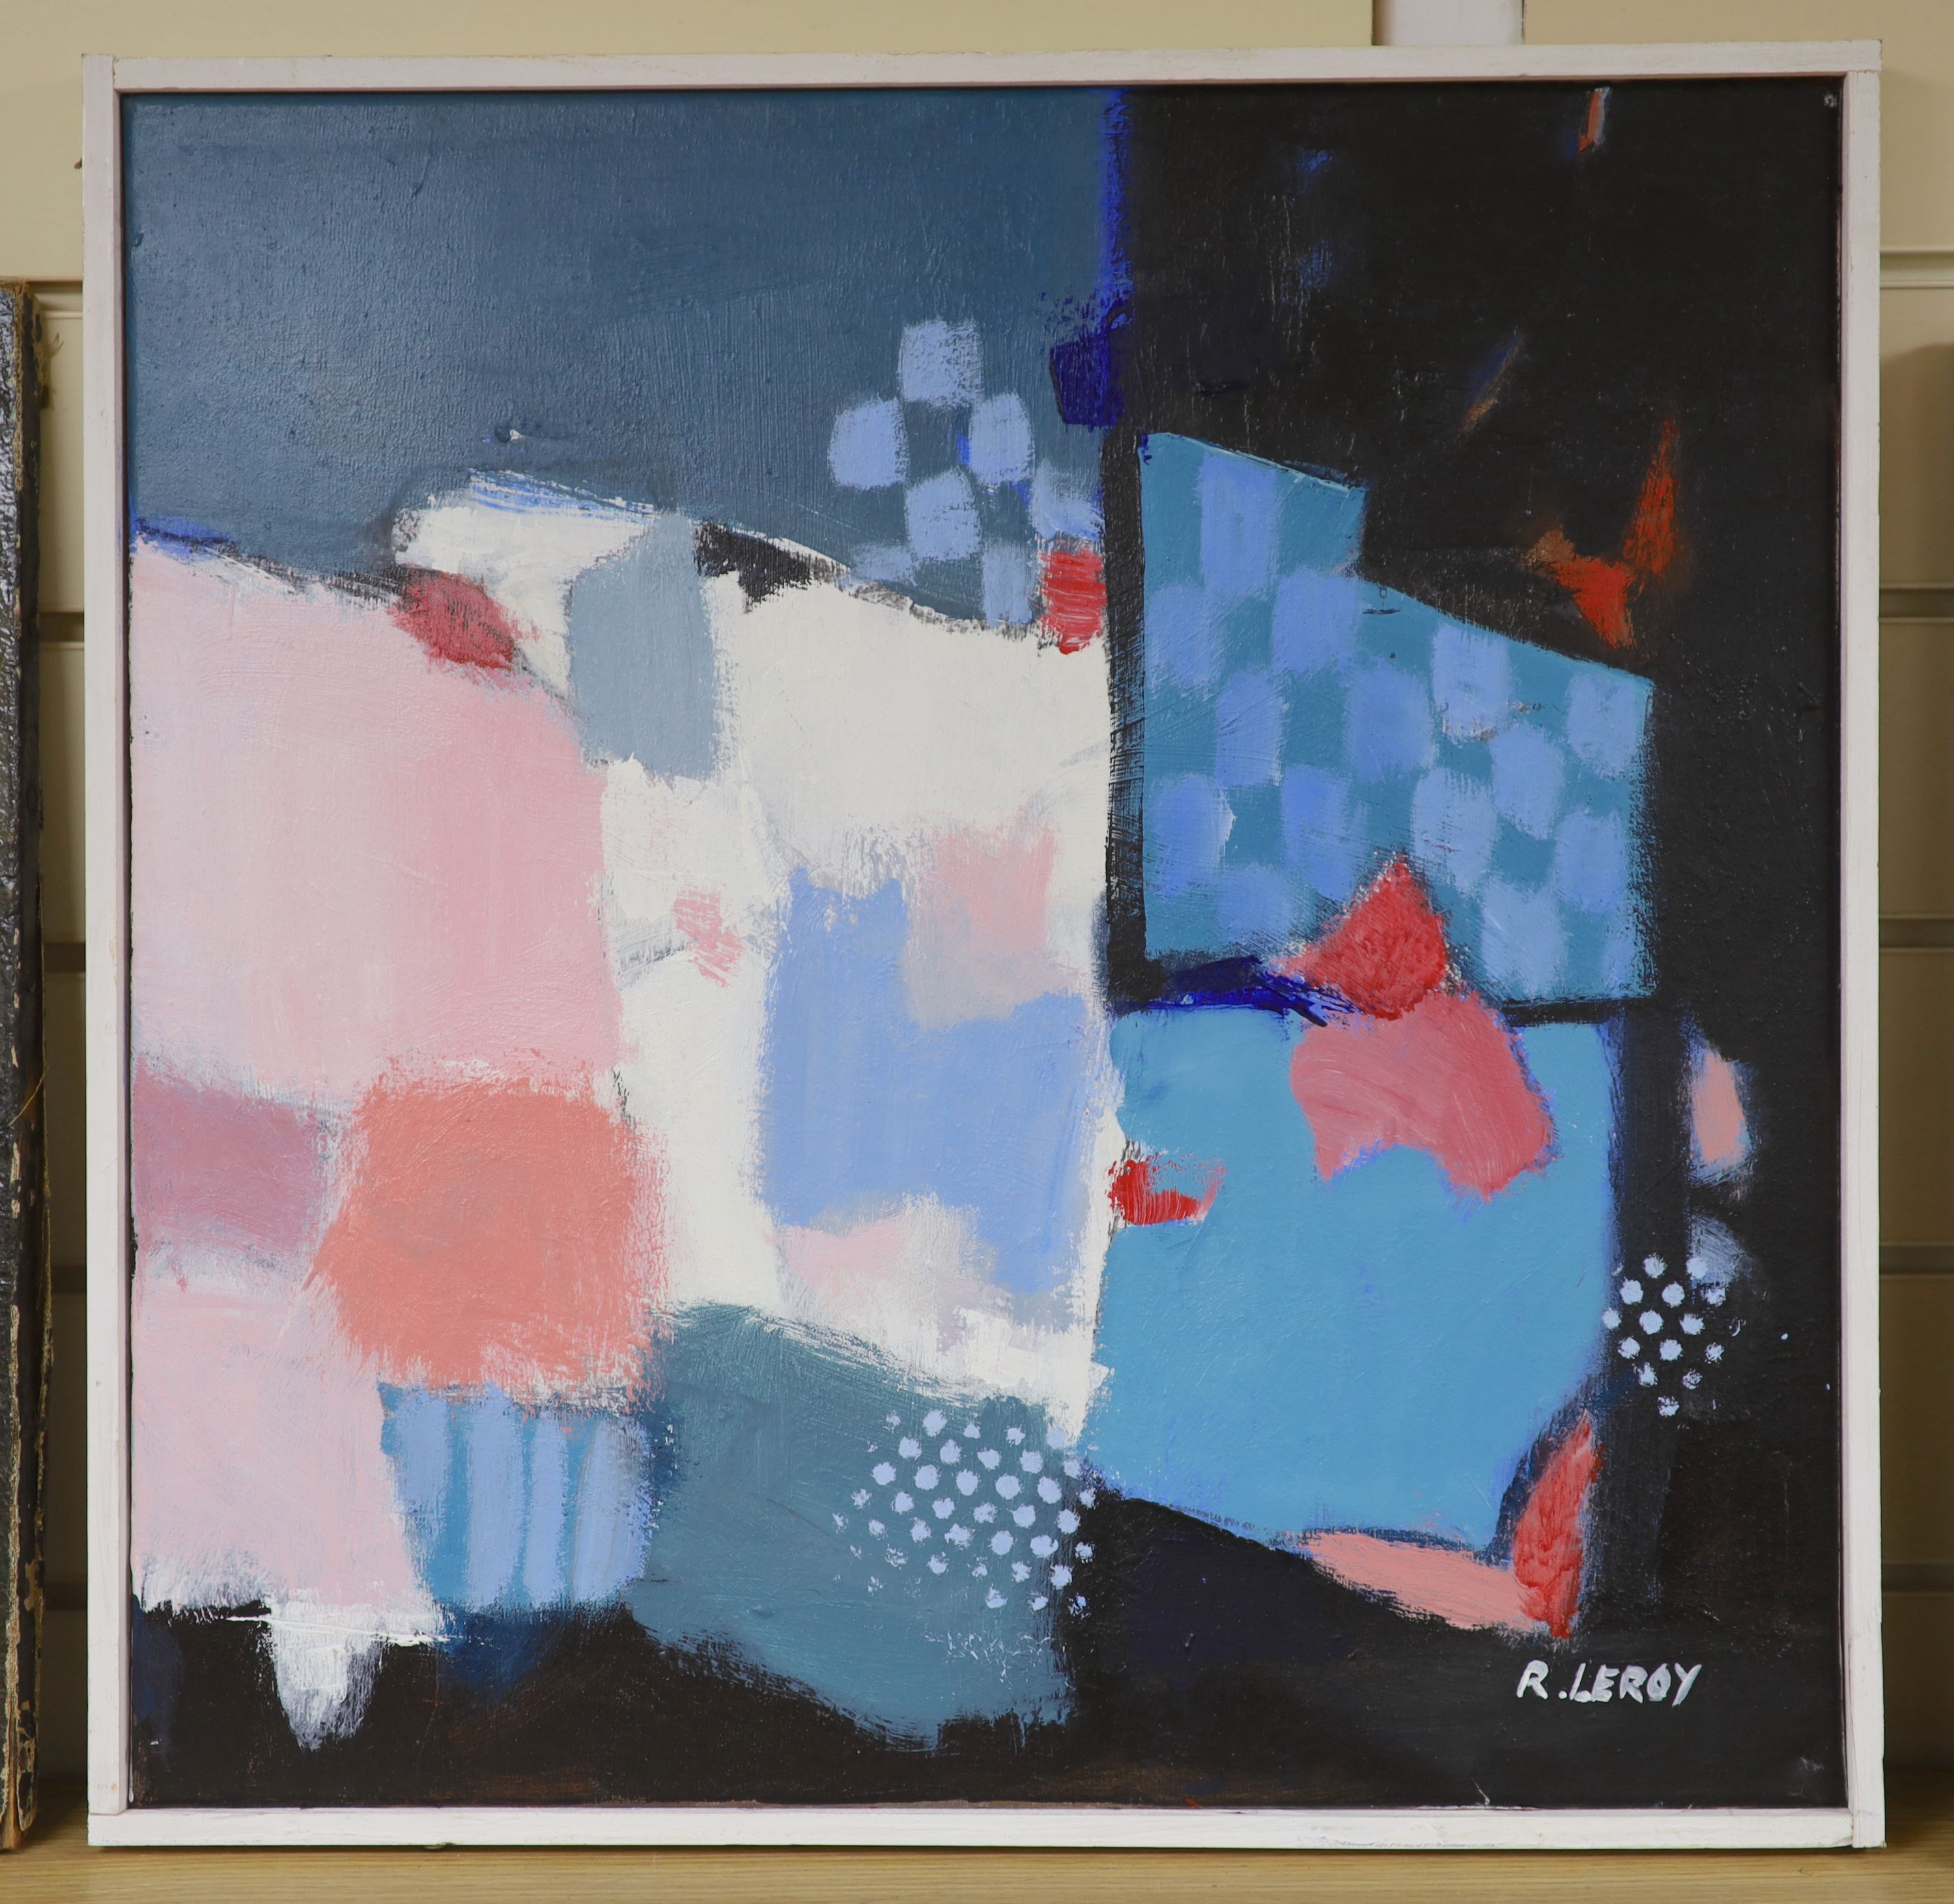 R.Leroy, abstract composition, oil on canvas, 20th century, framed, 52 x 52 cm, together with another (2).